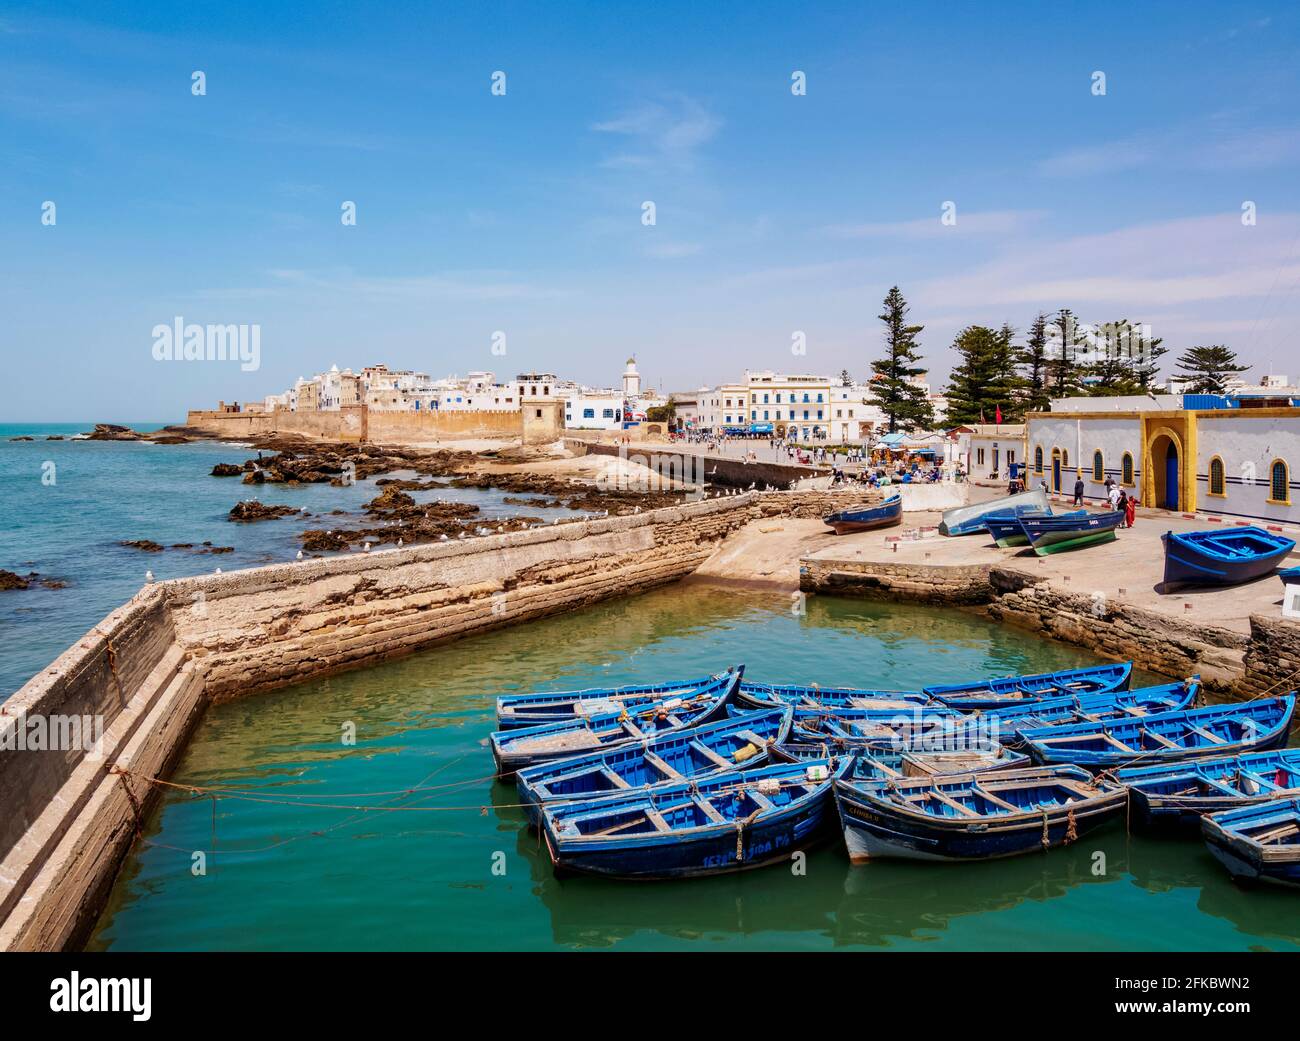 Cityscape with blue boats in the Scala Harbour and the Medina city walls, Essaouira, Marrakesh-Safi Region, Morocco, North Africa, Africa Stock Photo